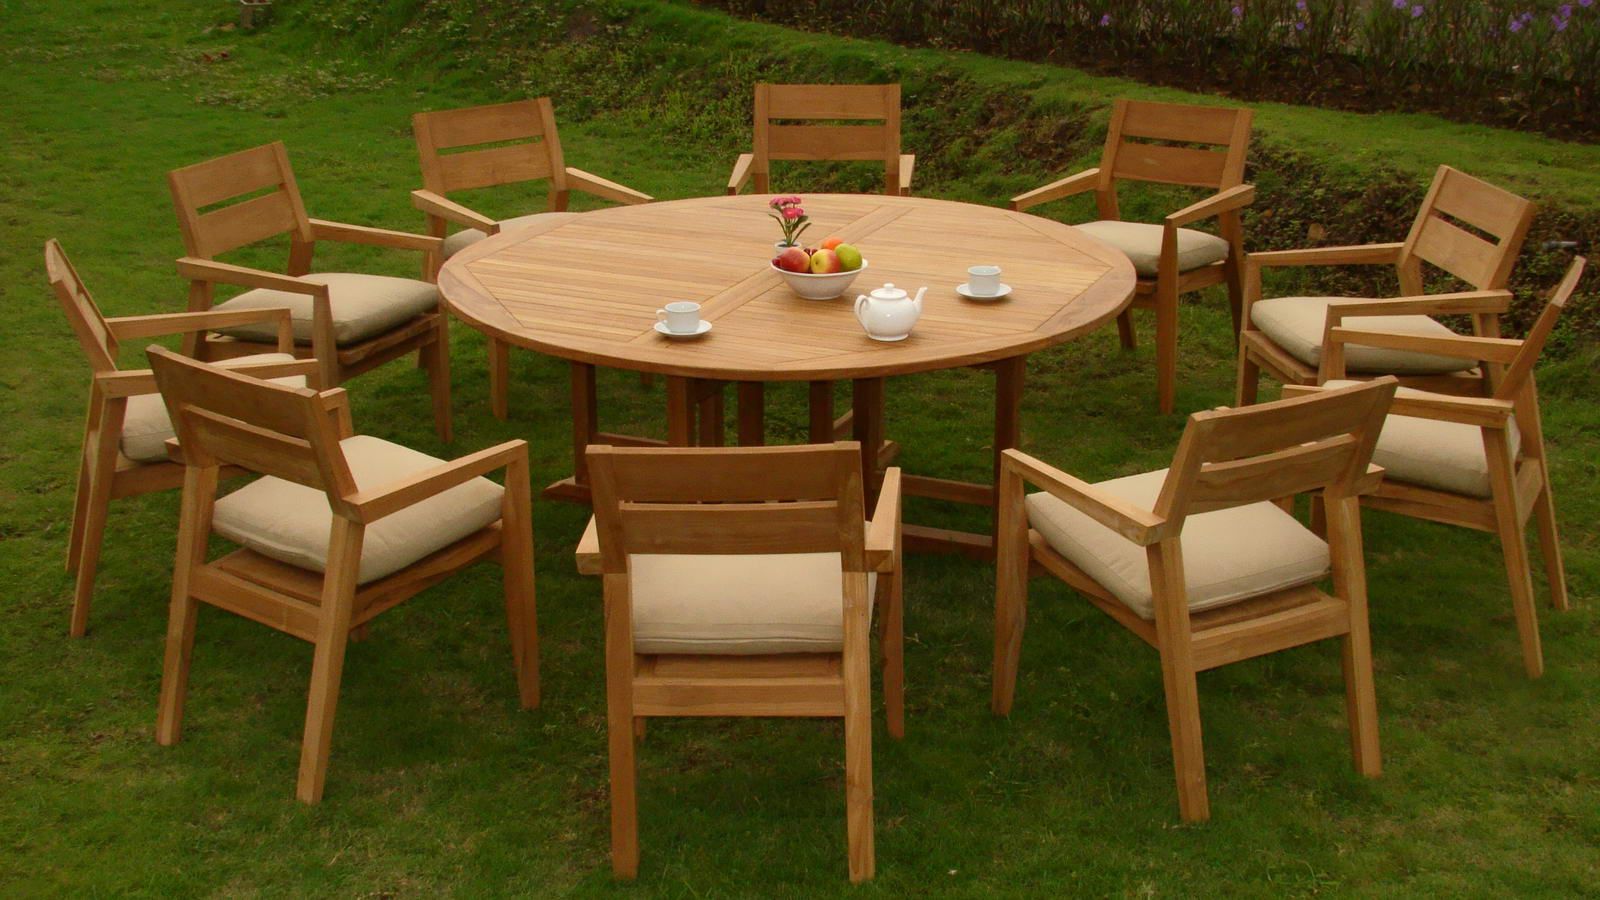 Teak Armchair Round Patio Dining Sets Intended For Famous 11 Pc A Grade Outdoor Patio Teak Dining Set – 72" Round Table &  (View 5 of 15)